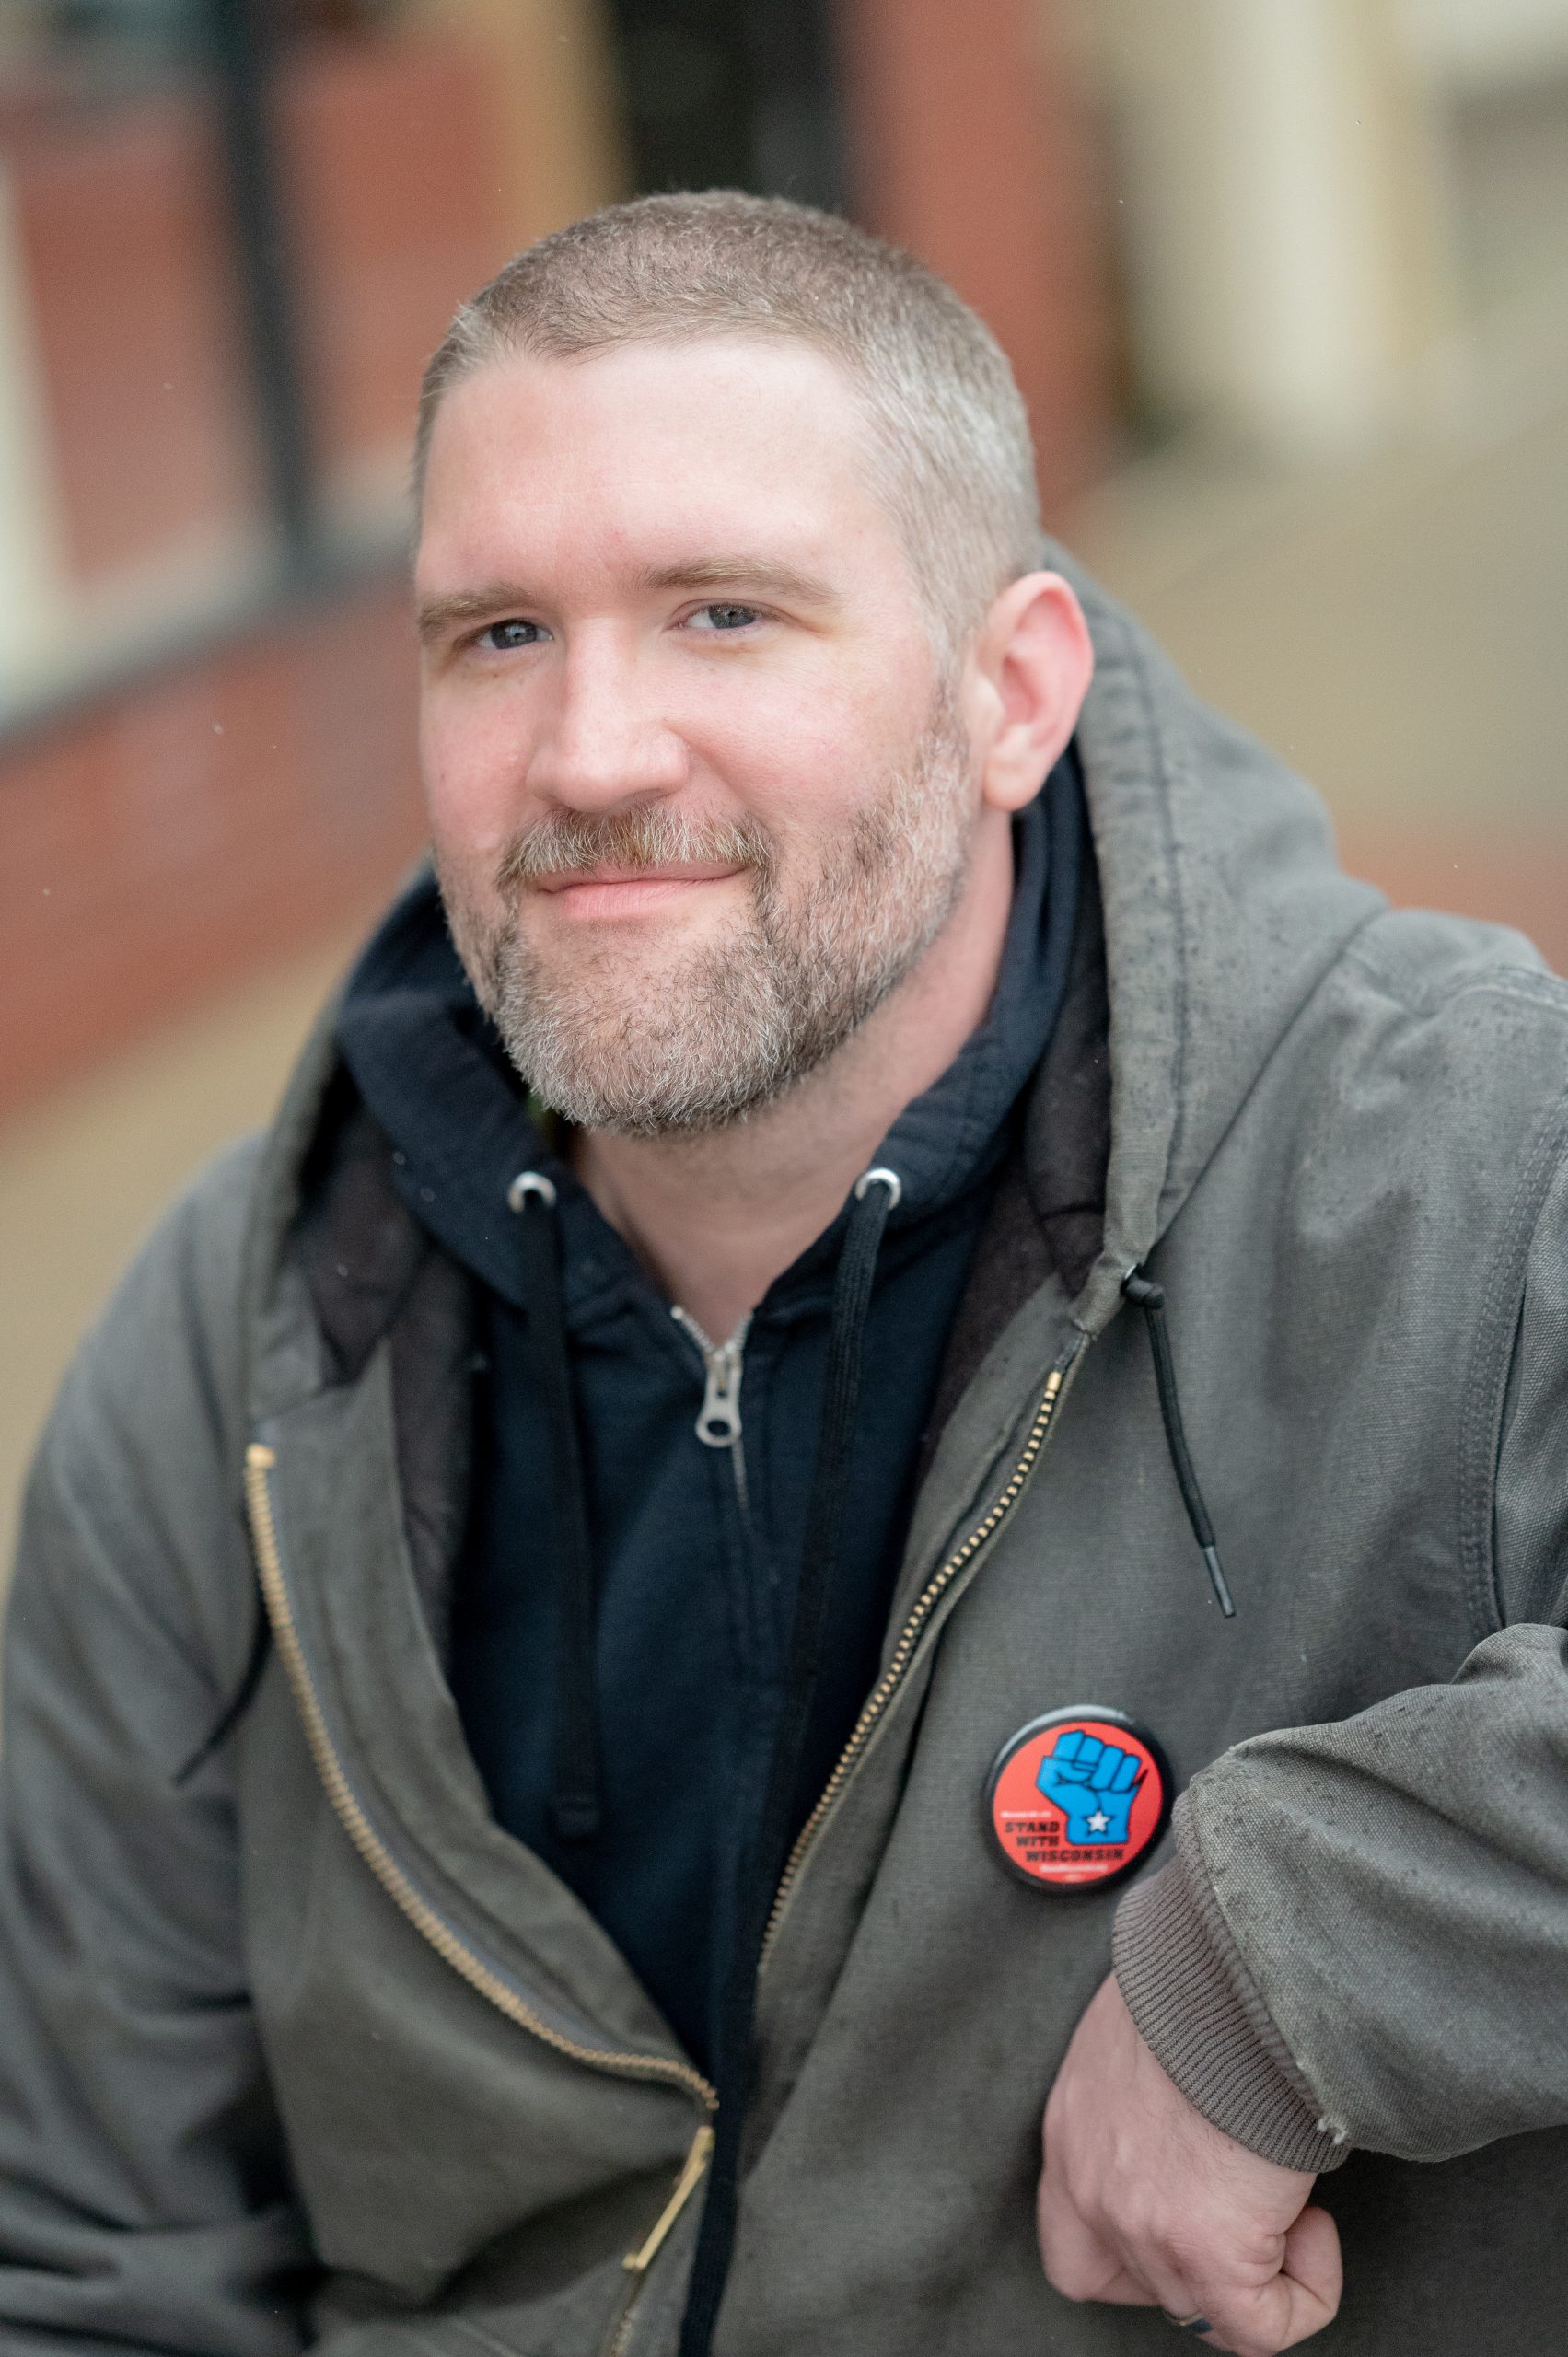 Nate Kieso, rank-and-file union member and mental health social worker, announces campaign for Wisconsin State Assembly District 14